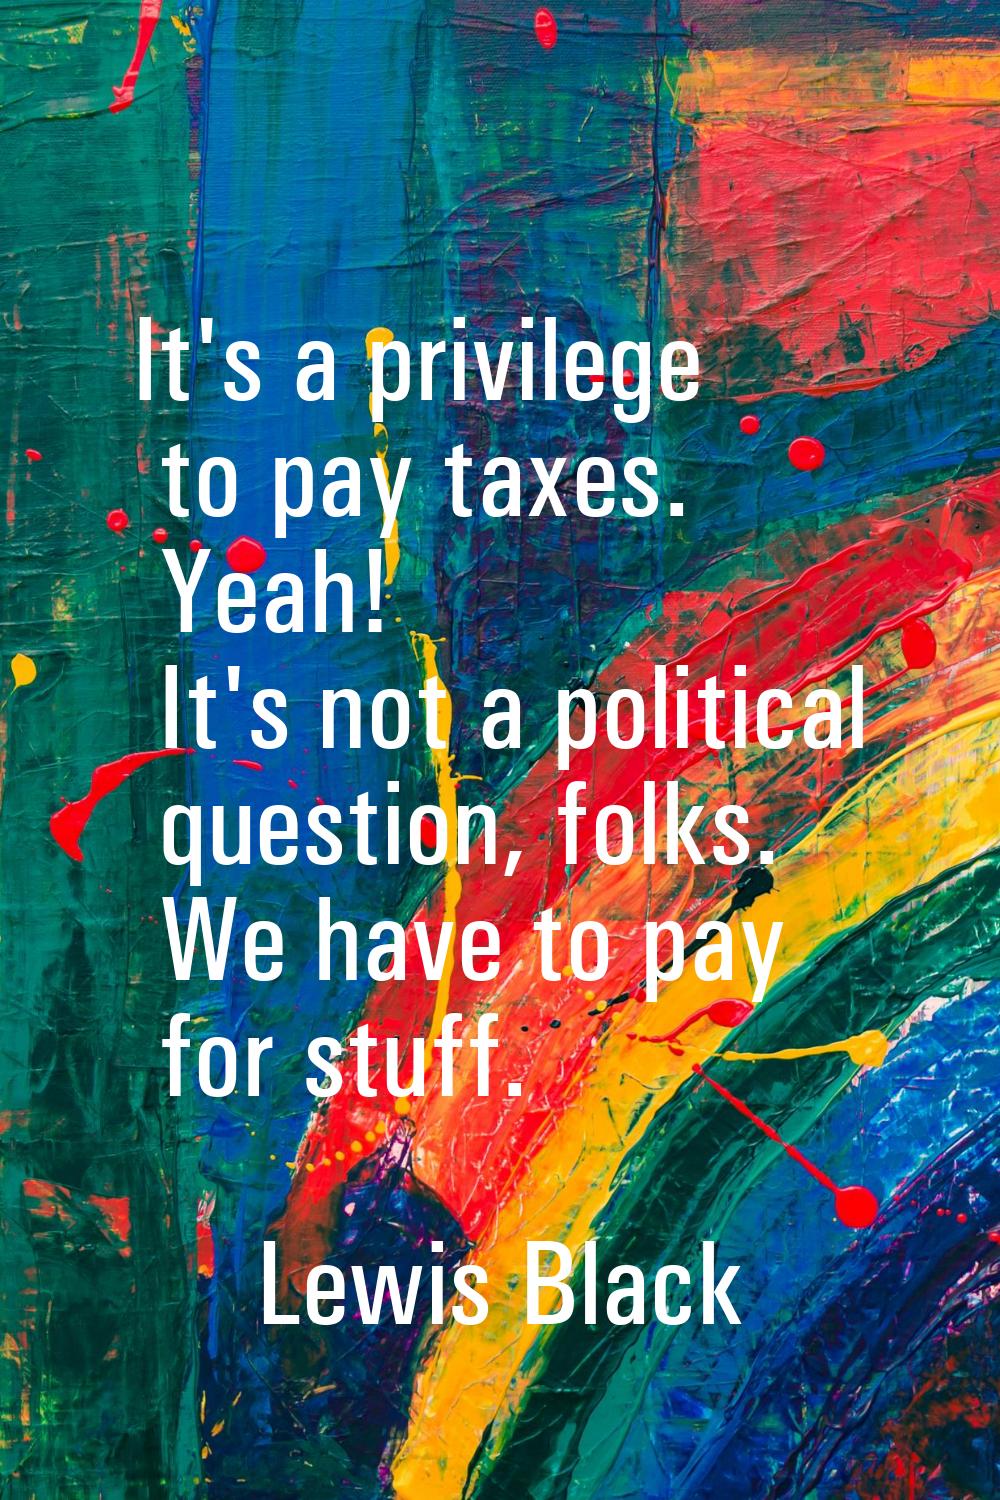 It's a privilege to pay taxes. Yeah! It's not a political question, folks. We have to pay for stuff